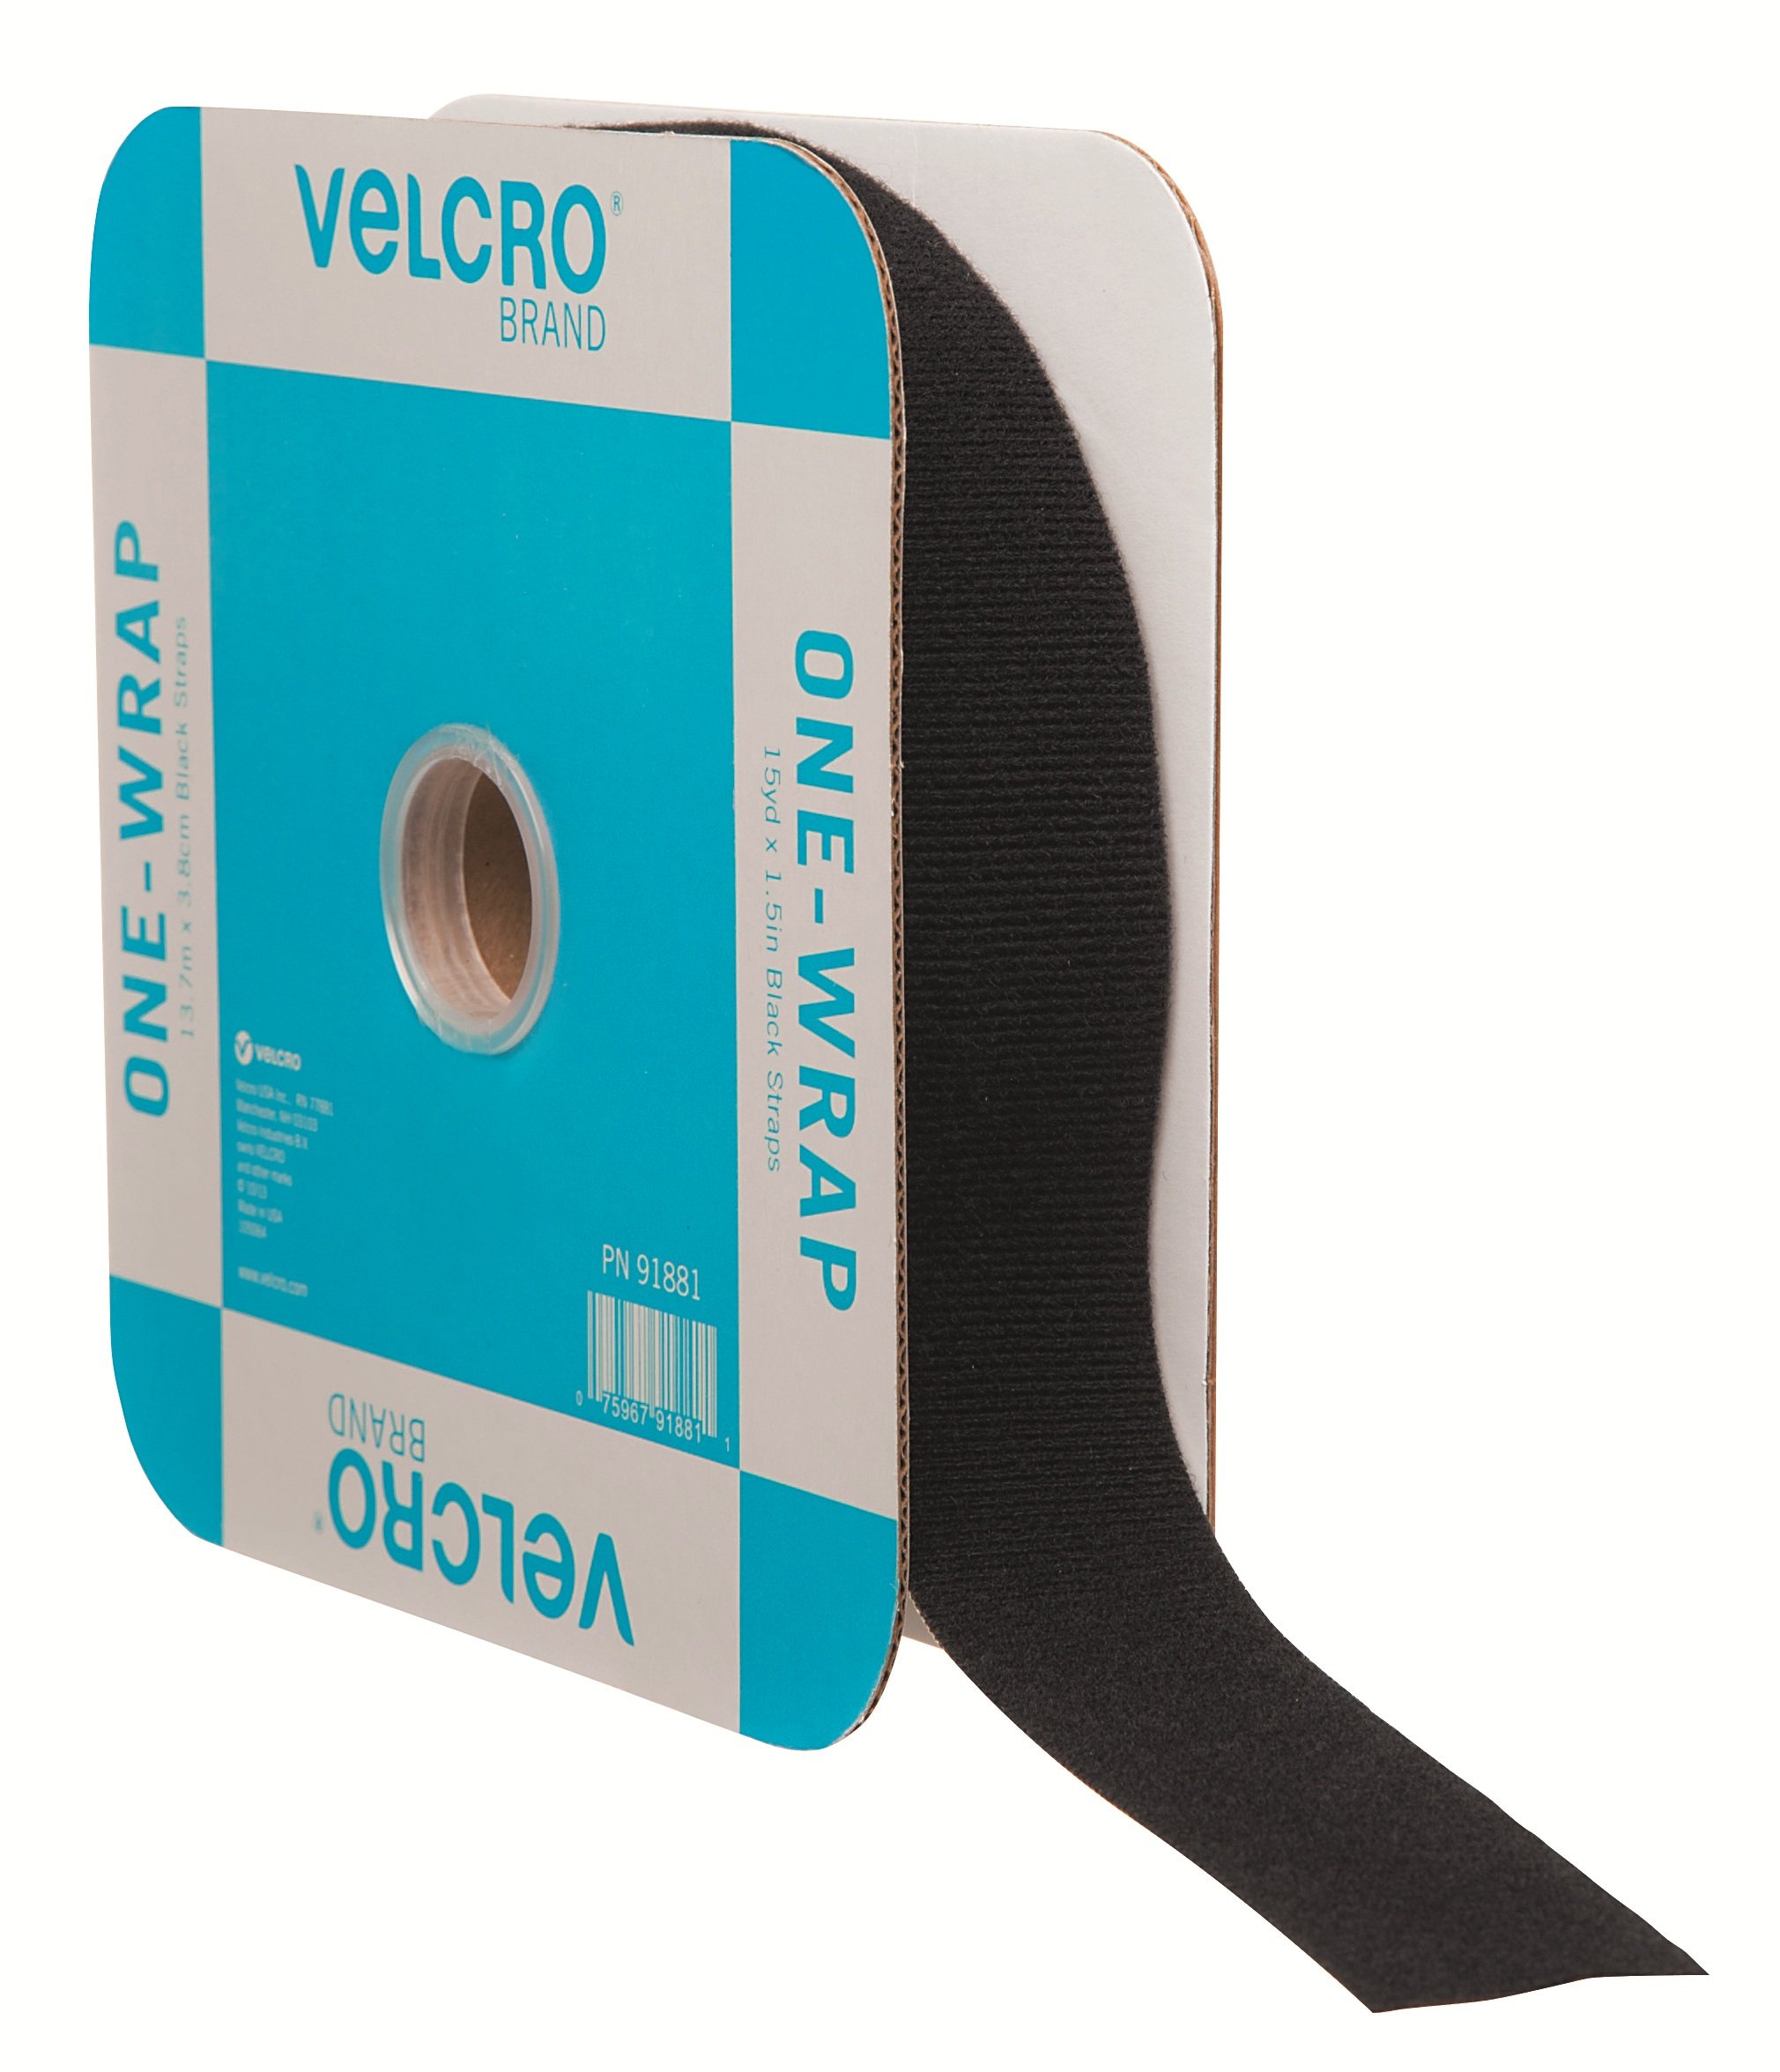 Buy VELCRO Brand ONE WRAP Thin Ties, Strong & Reusable, Perfect for  Fastening Wires & Organizing Cords, Black/Gray, 15in x 1/2-Inch